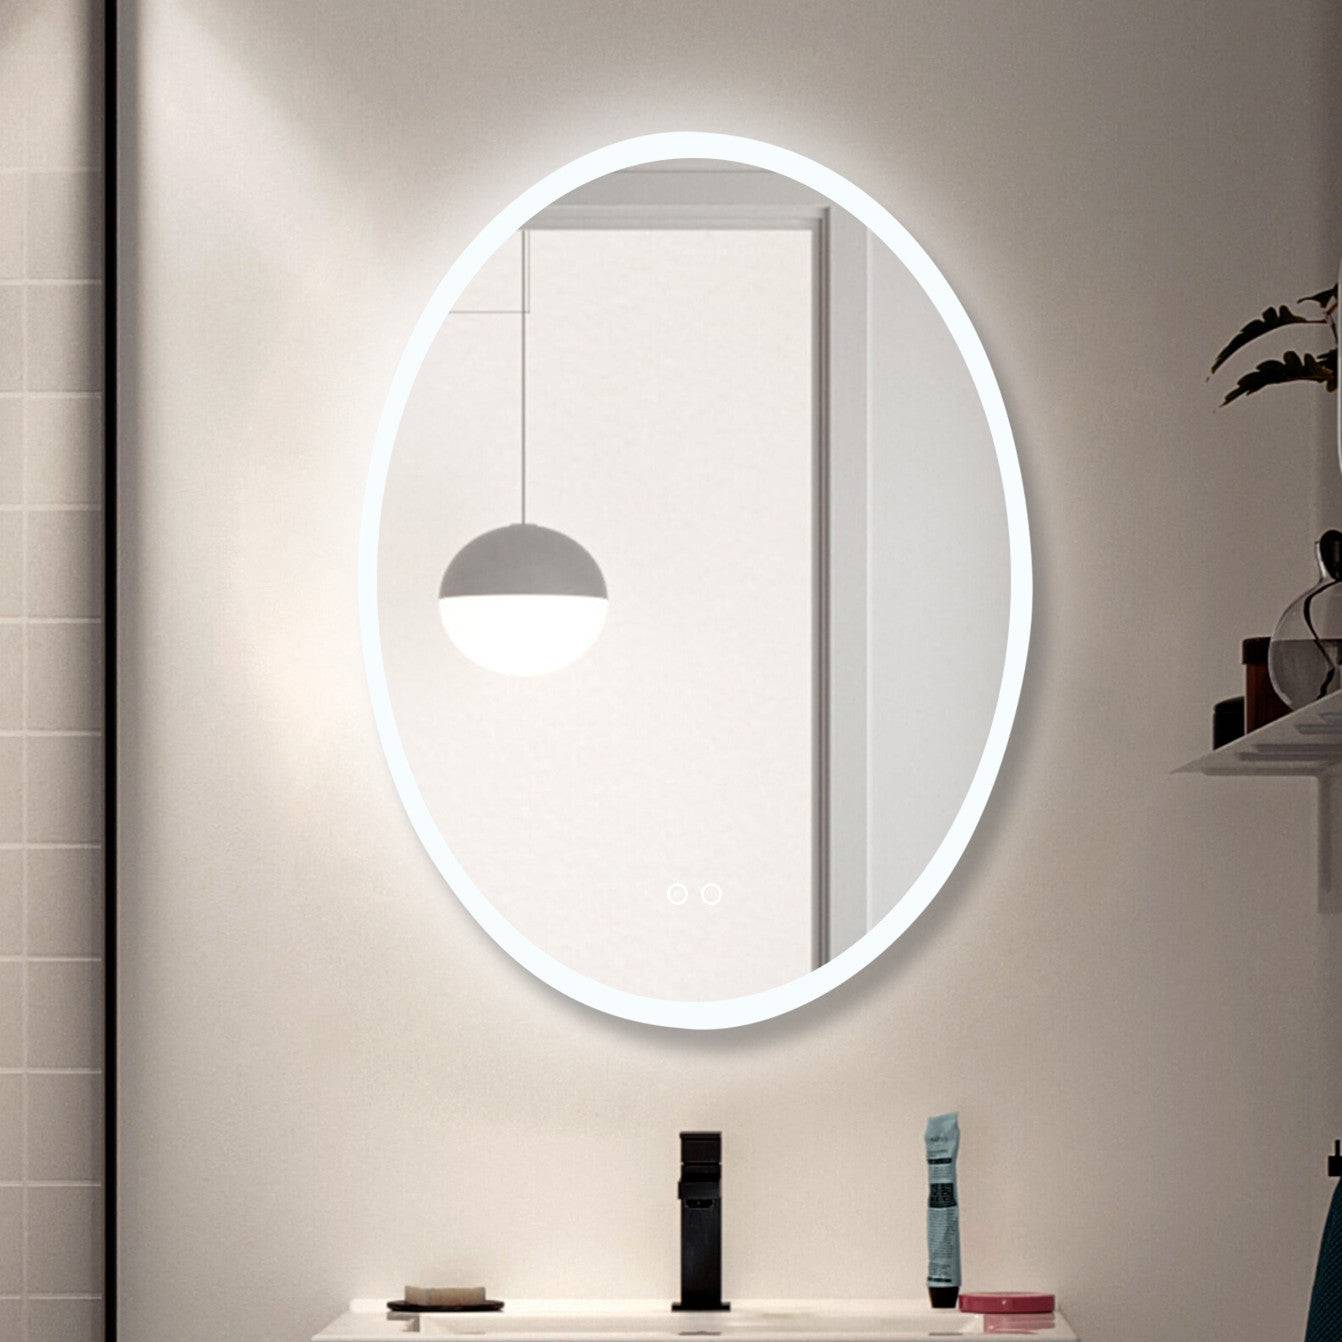 ELL Equator Series - Oval - Modern LED Bathroom Mirror with Defogger, Color Temperature Adjustable, ETL Listed & IP44 Rated, Vertical or Horizontal Mounting - Stylish and Functional Copper-Free Mirror with Acrylic Diffuser - Eco LED Lightings 